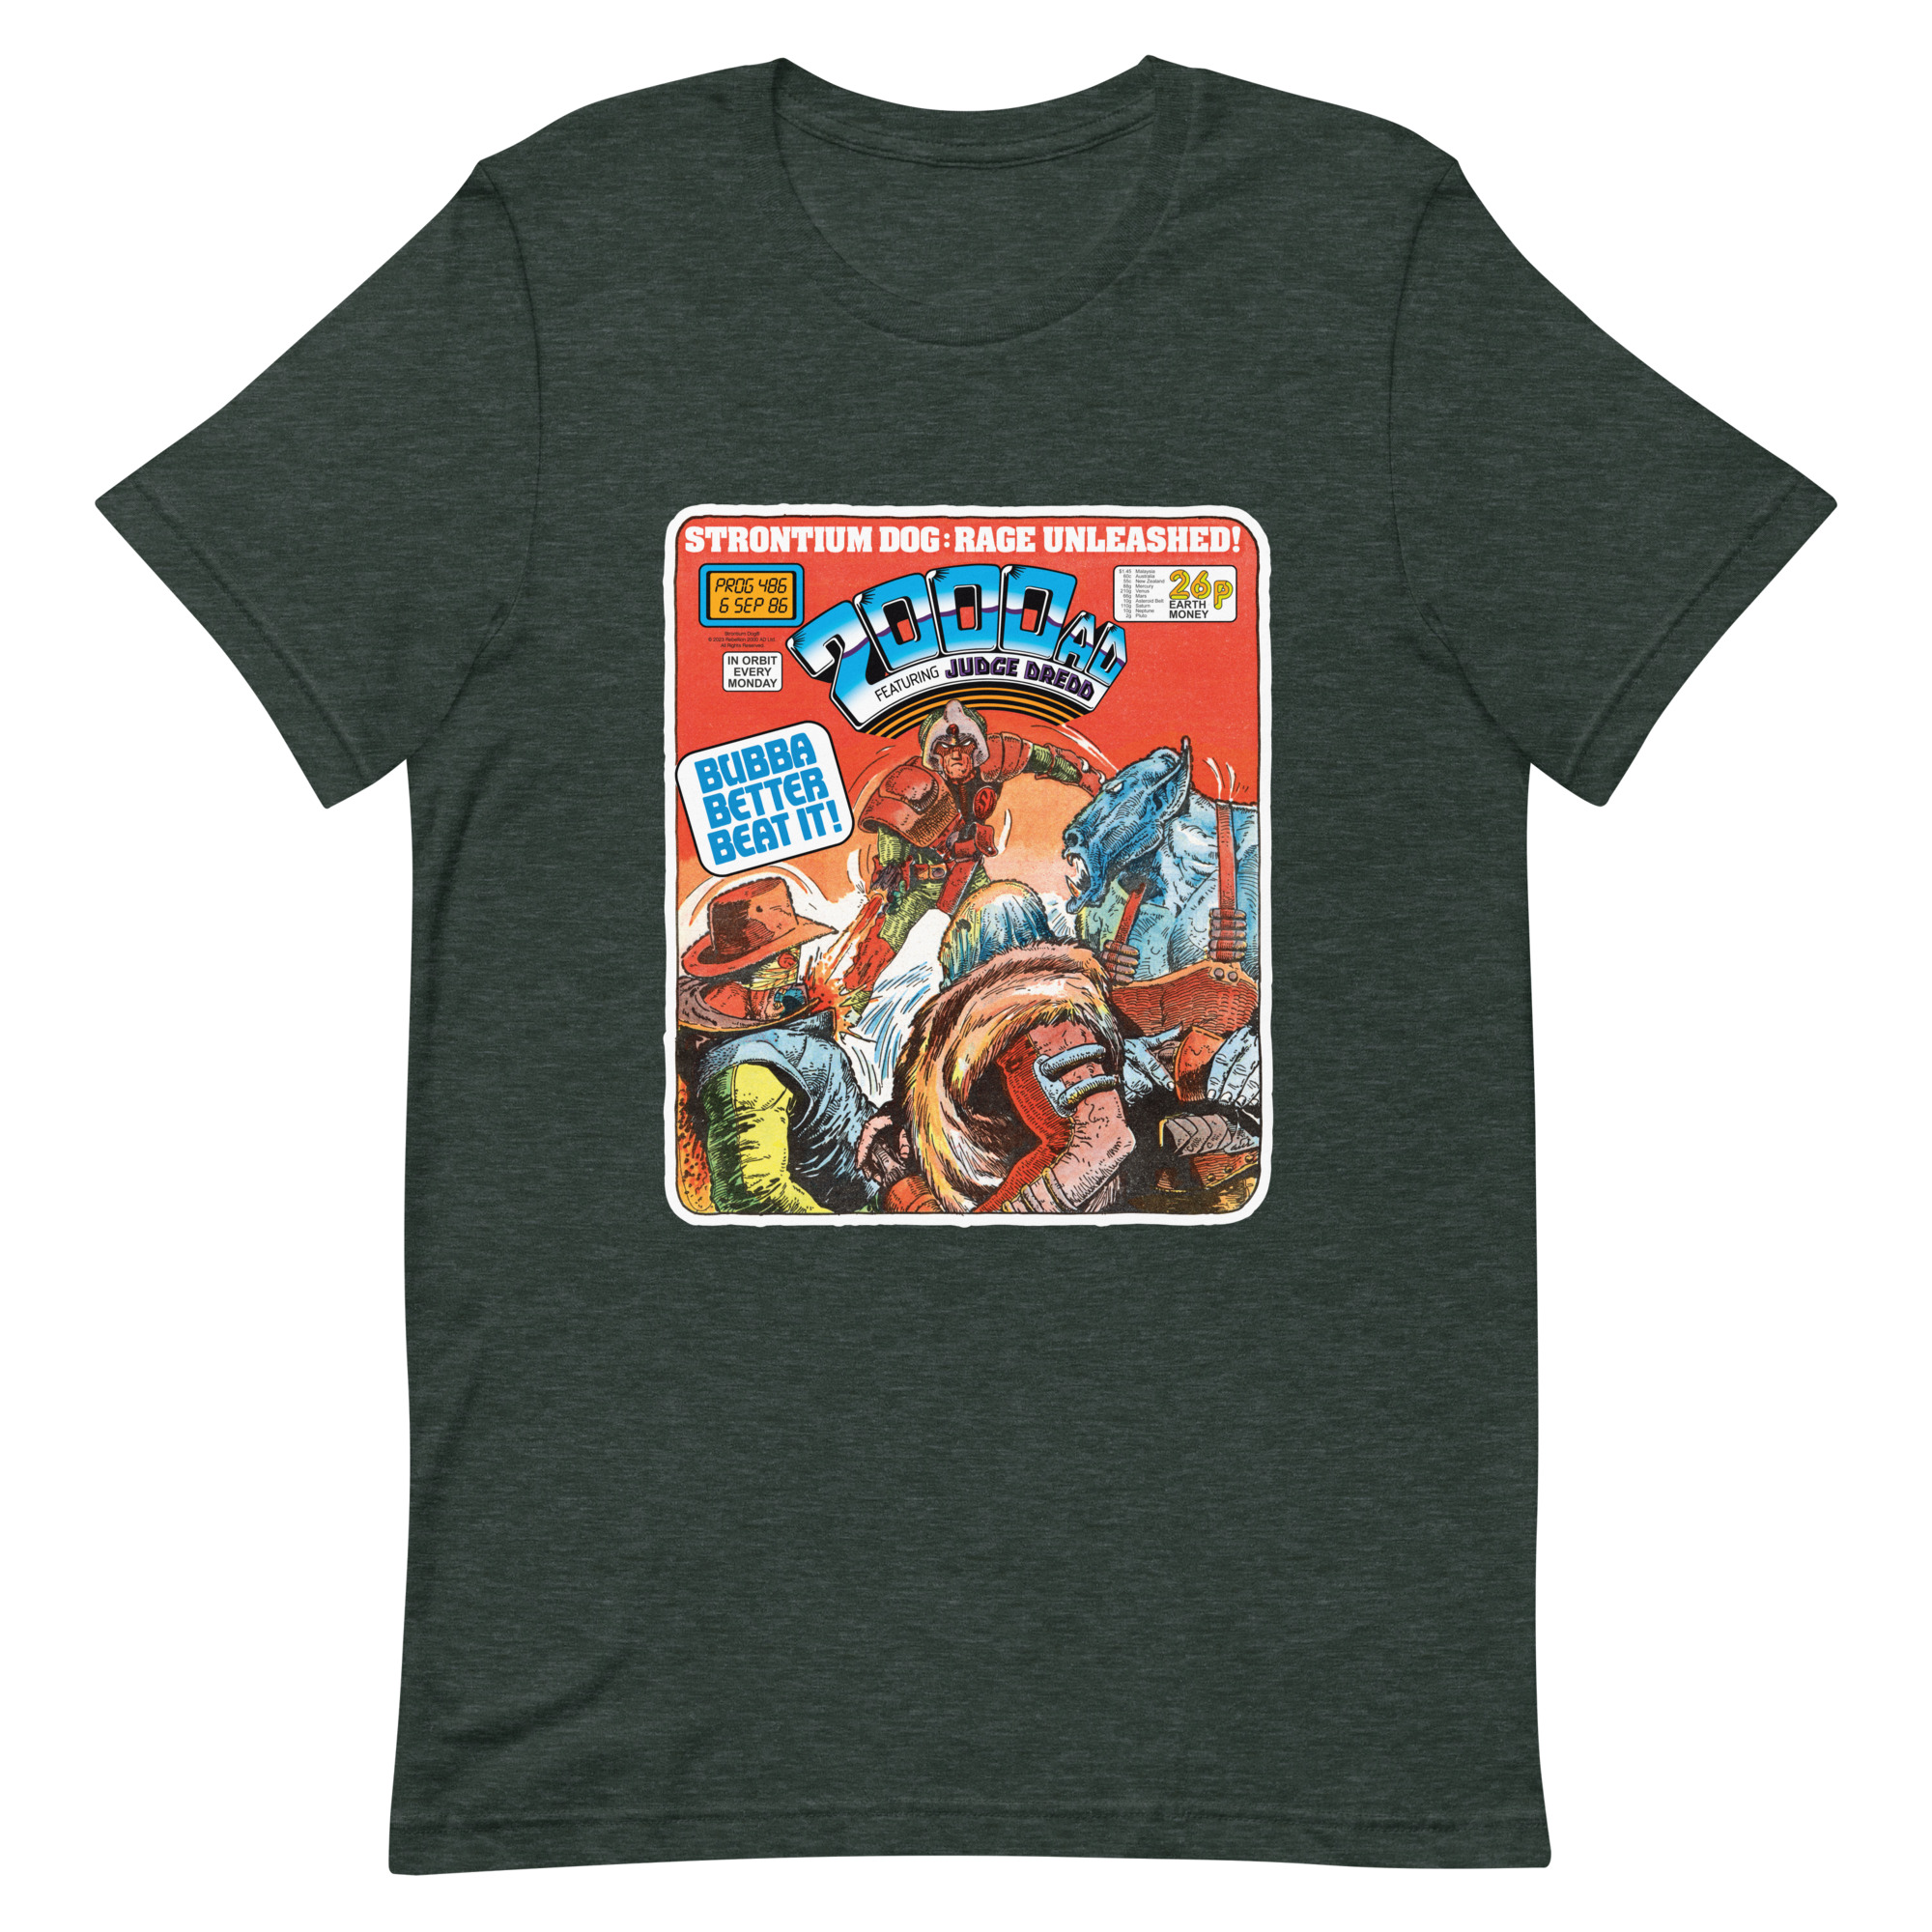 Dark Green Tshirt with a 'Classic' 2000 AD Cover image on the chest. In the image Strontium Dog faces off against three alien ruffians.